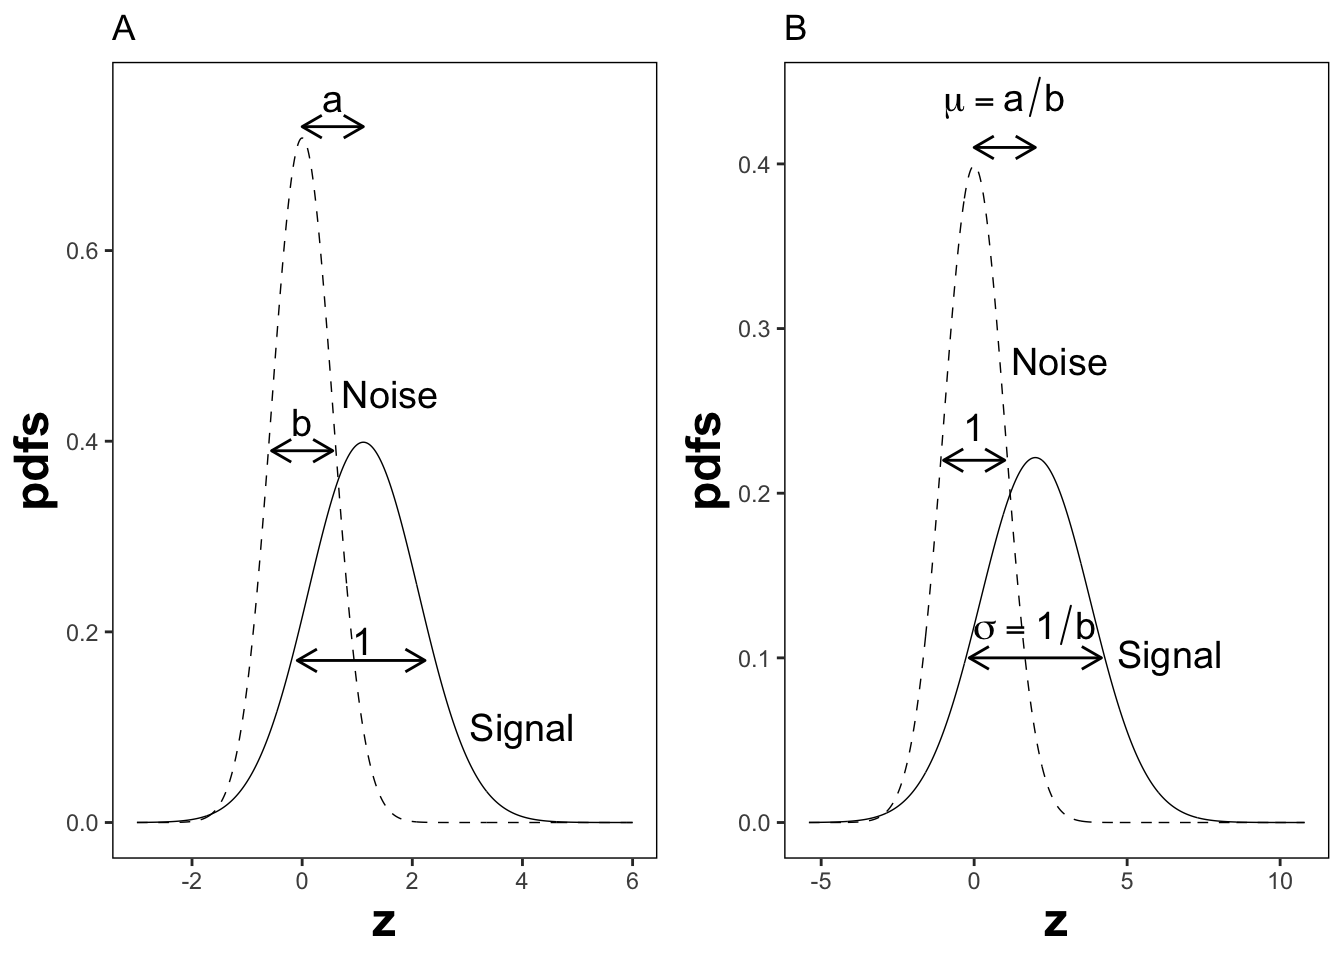 Plot A shows the definitions of the (a,b) parameters of the binormal model. In plot B the x-axis has been rescaled so that the noise distribution has unit variance; this illustrates the difference between the (a,b) and the ($\mu,\sigma$) parameters. In this figure $\mu = 2$ and $\sigma = 1.8$ which correspond to $a = 1.11$ and $b = 0.556$.